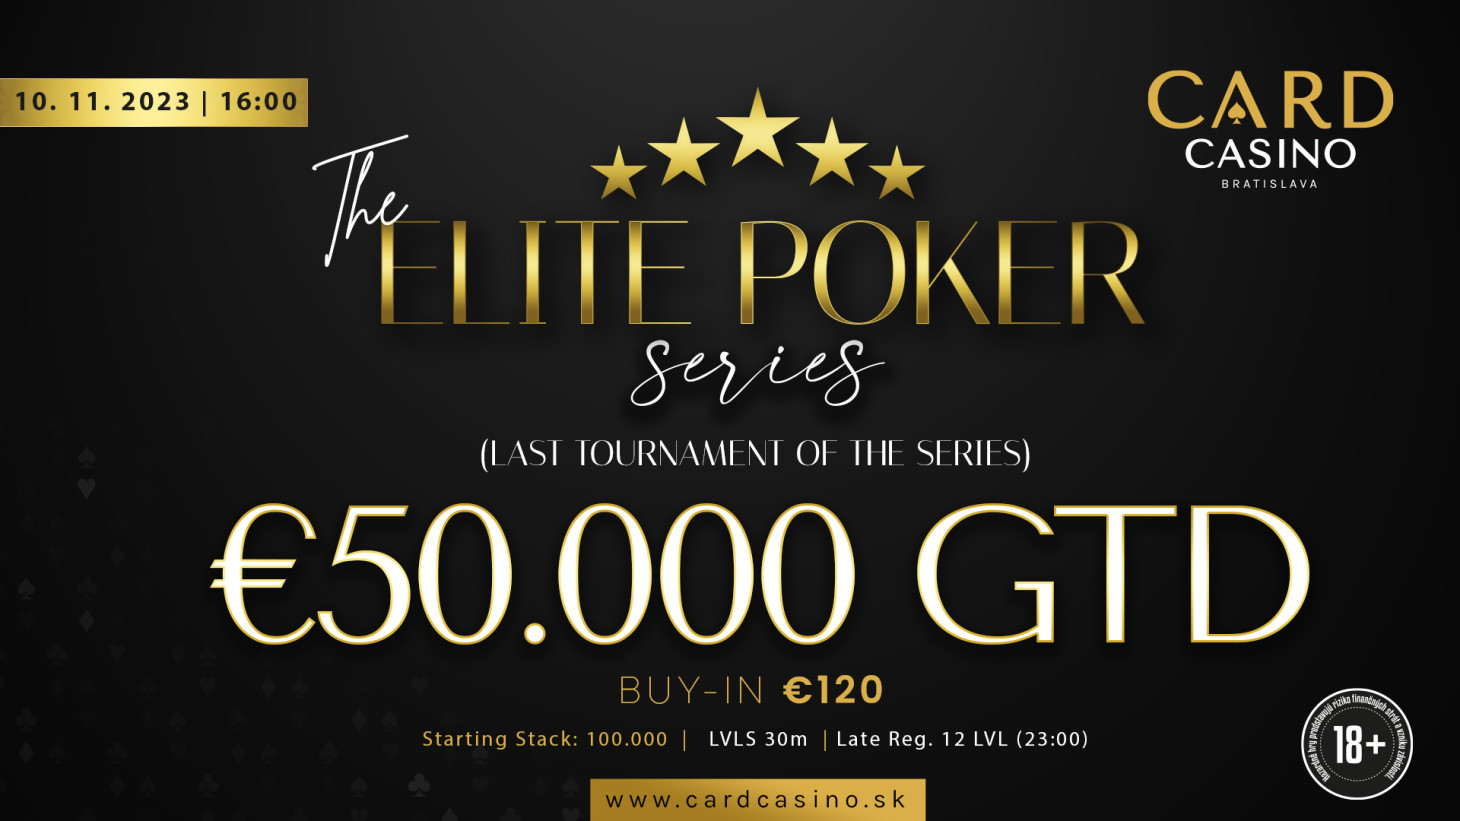 A week of mega one-day poker. Nearly €100,000 on the line, the ELITE series culminates